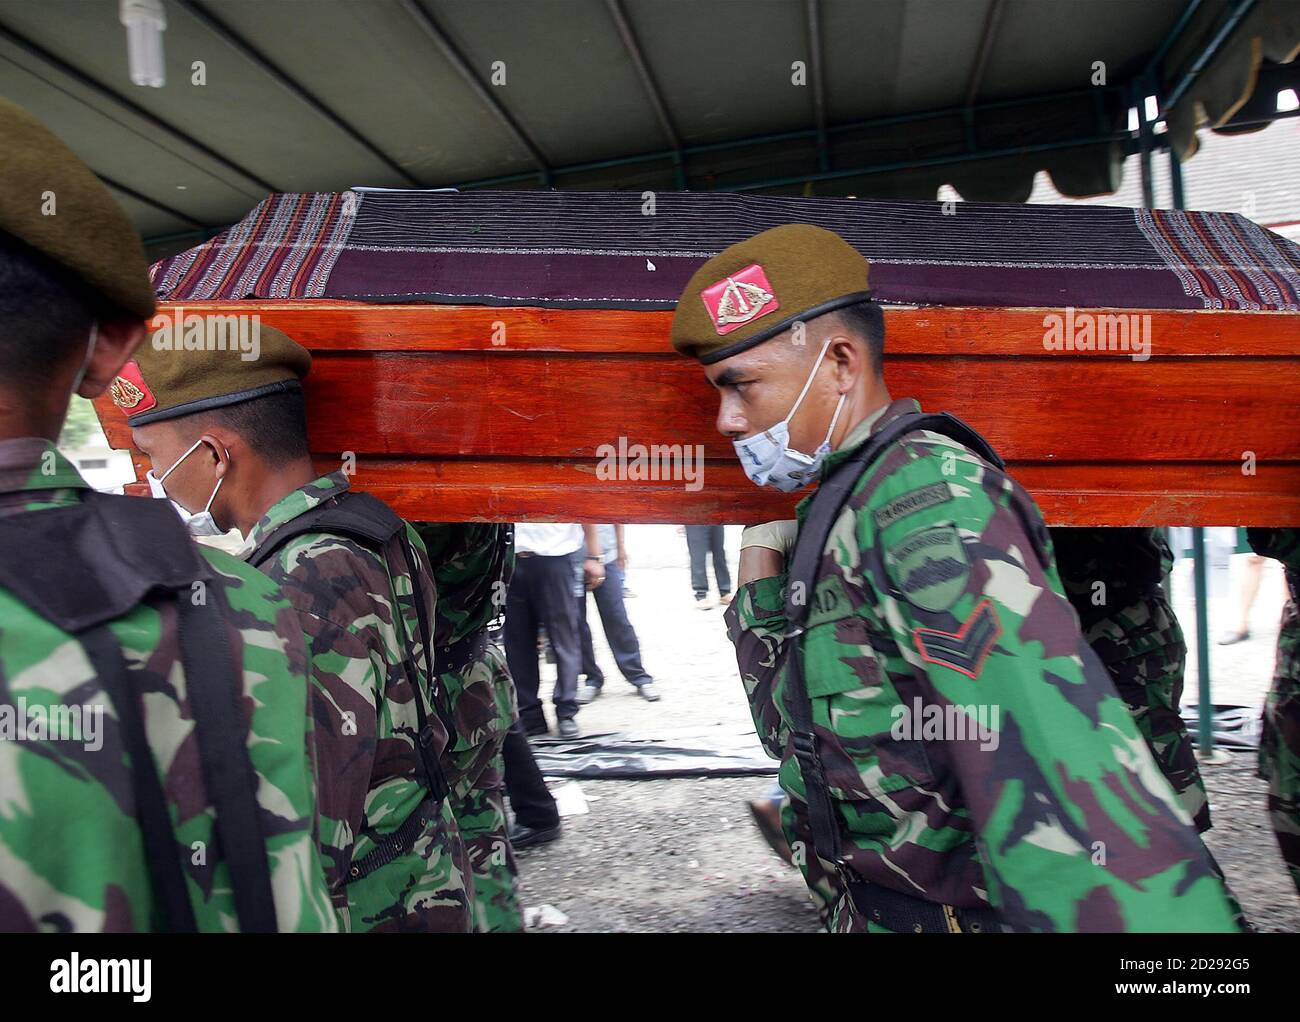 Indonesian soldiers carry a coffin of an unidentified body outside a morgue at a hospital in Medan, Indonesia, September 7, 2005. A preliminary probe into the crash of an Indonesian airliner that killed 149 people has found a fuel problem with one of the plane's engines, a transport safety official said on Wednesday. Authorities prepared a mass funeral for 57 victims whose bodies were too charred to identify. They will be buried in a field on Wednesday where the remains of victims from two previous air crashes near Indonesia's third biggest city also lie. REUTERS/Supri  supri/PN Stock Photo